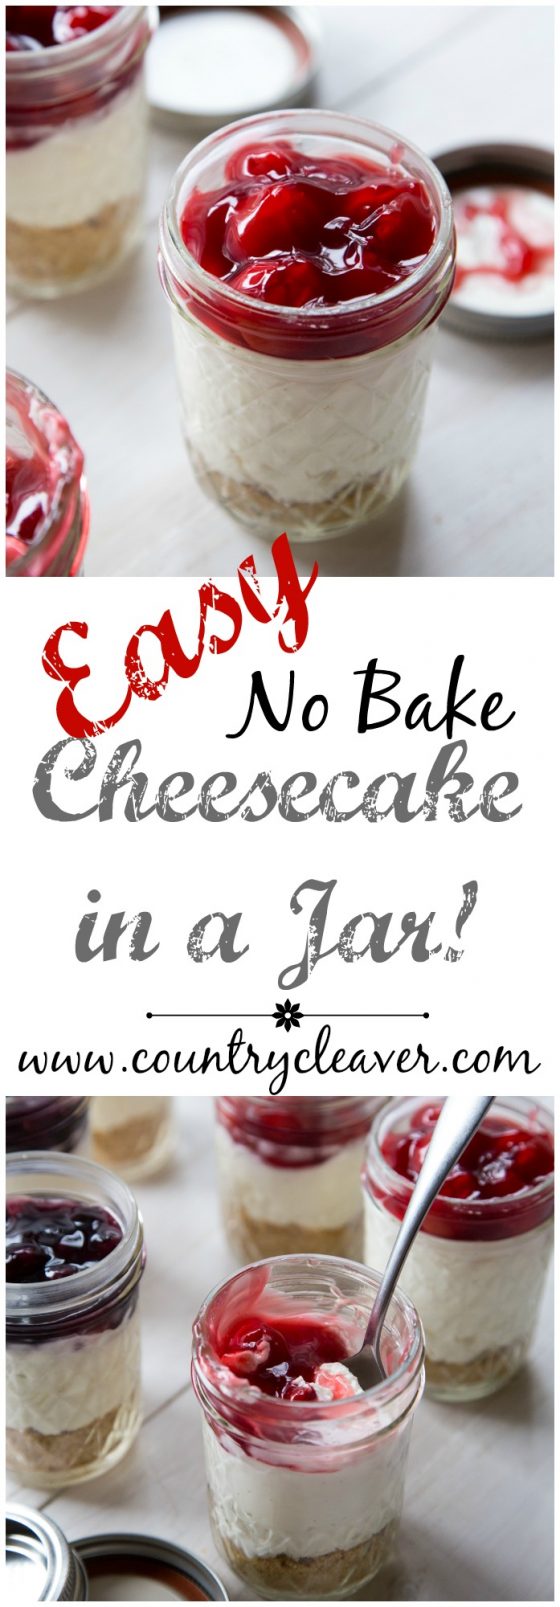 Easy No Bake Cheesecake In a Jar, with cherries on top, and text